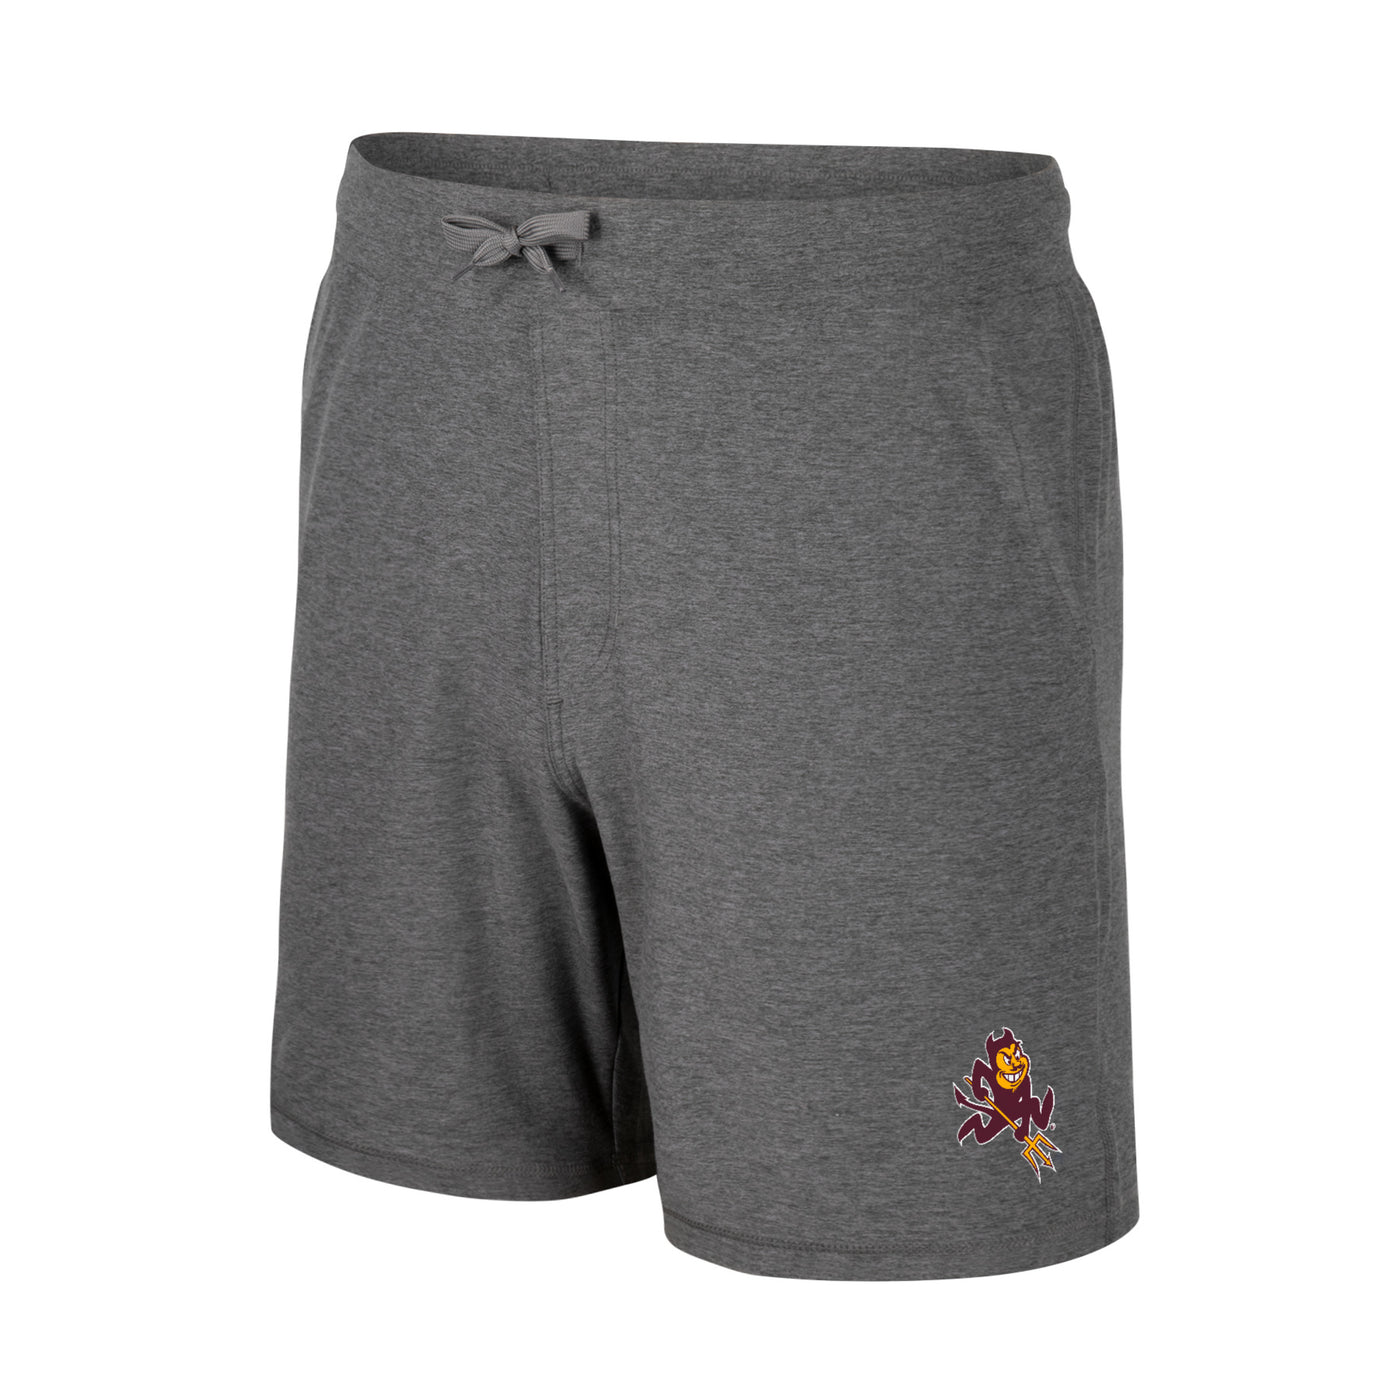 Mens grey athletic shorts with sparky mascot on bottom corner.